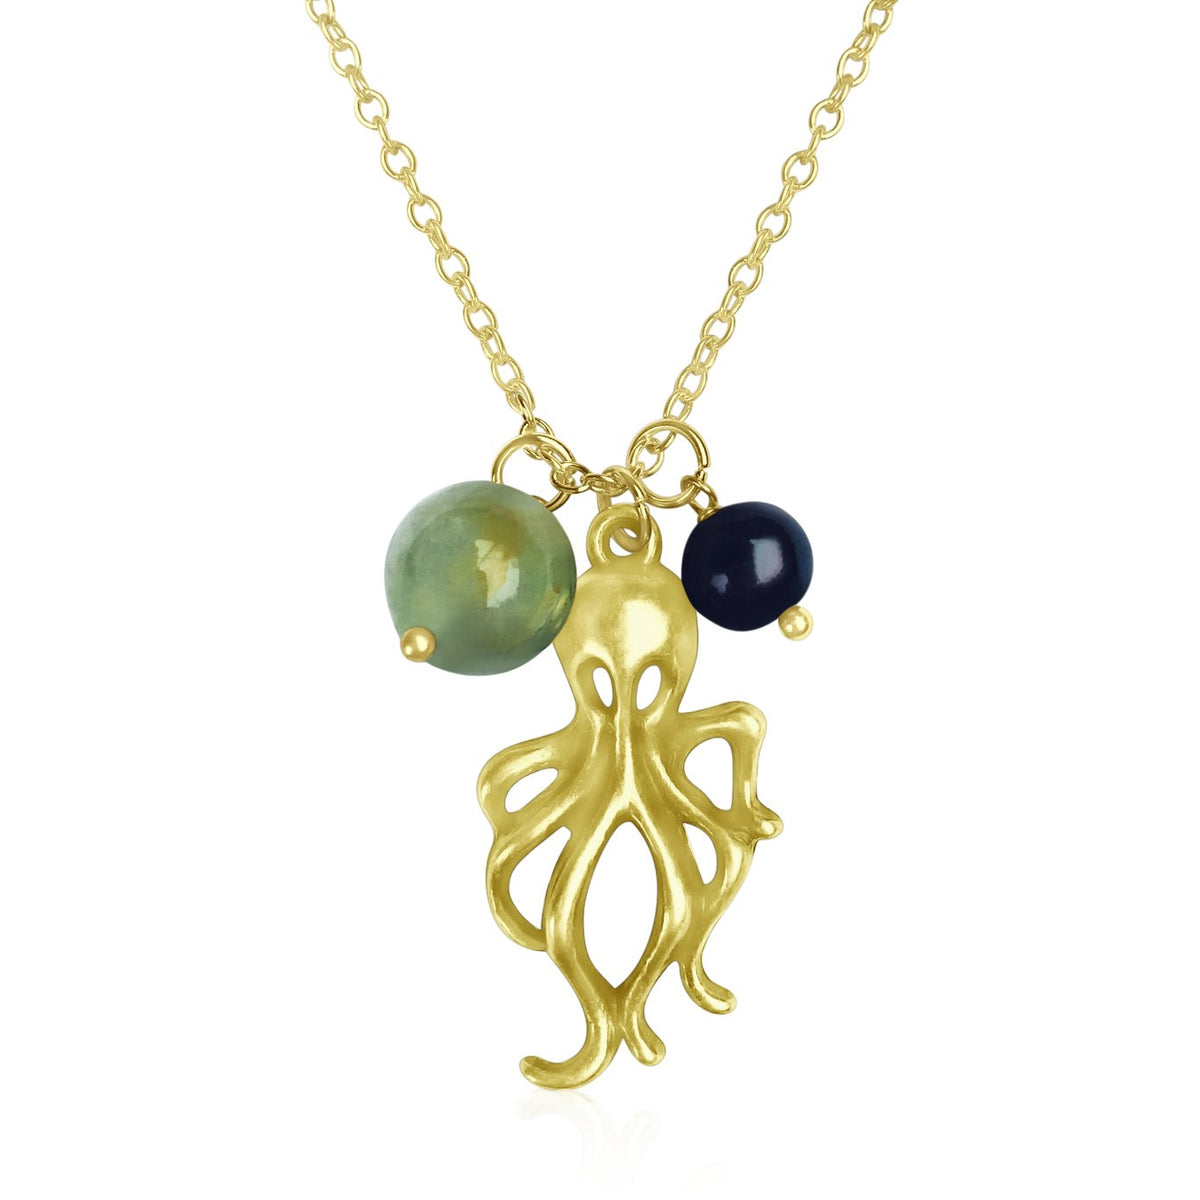 Octopus Ocean Charm Necklace with Prehnite and Pearl Charms on Gold Plated Necklace.